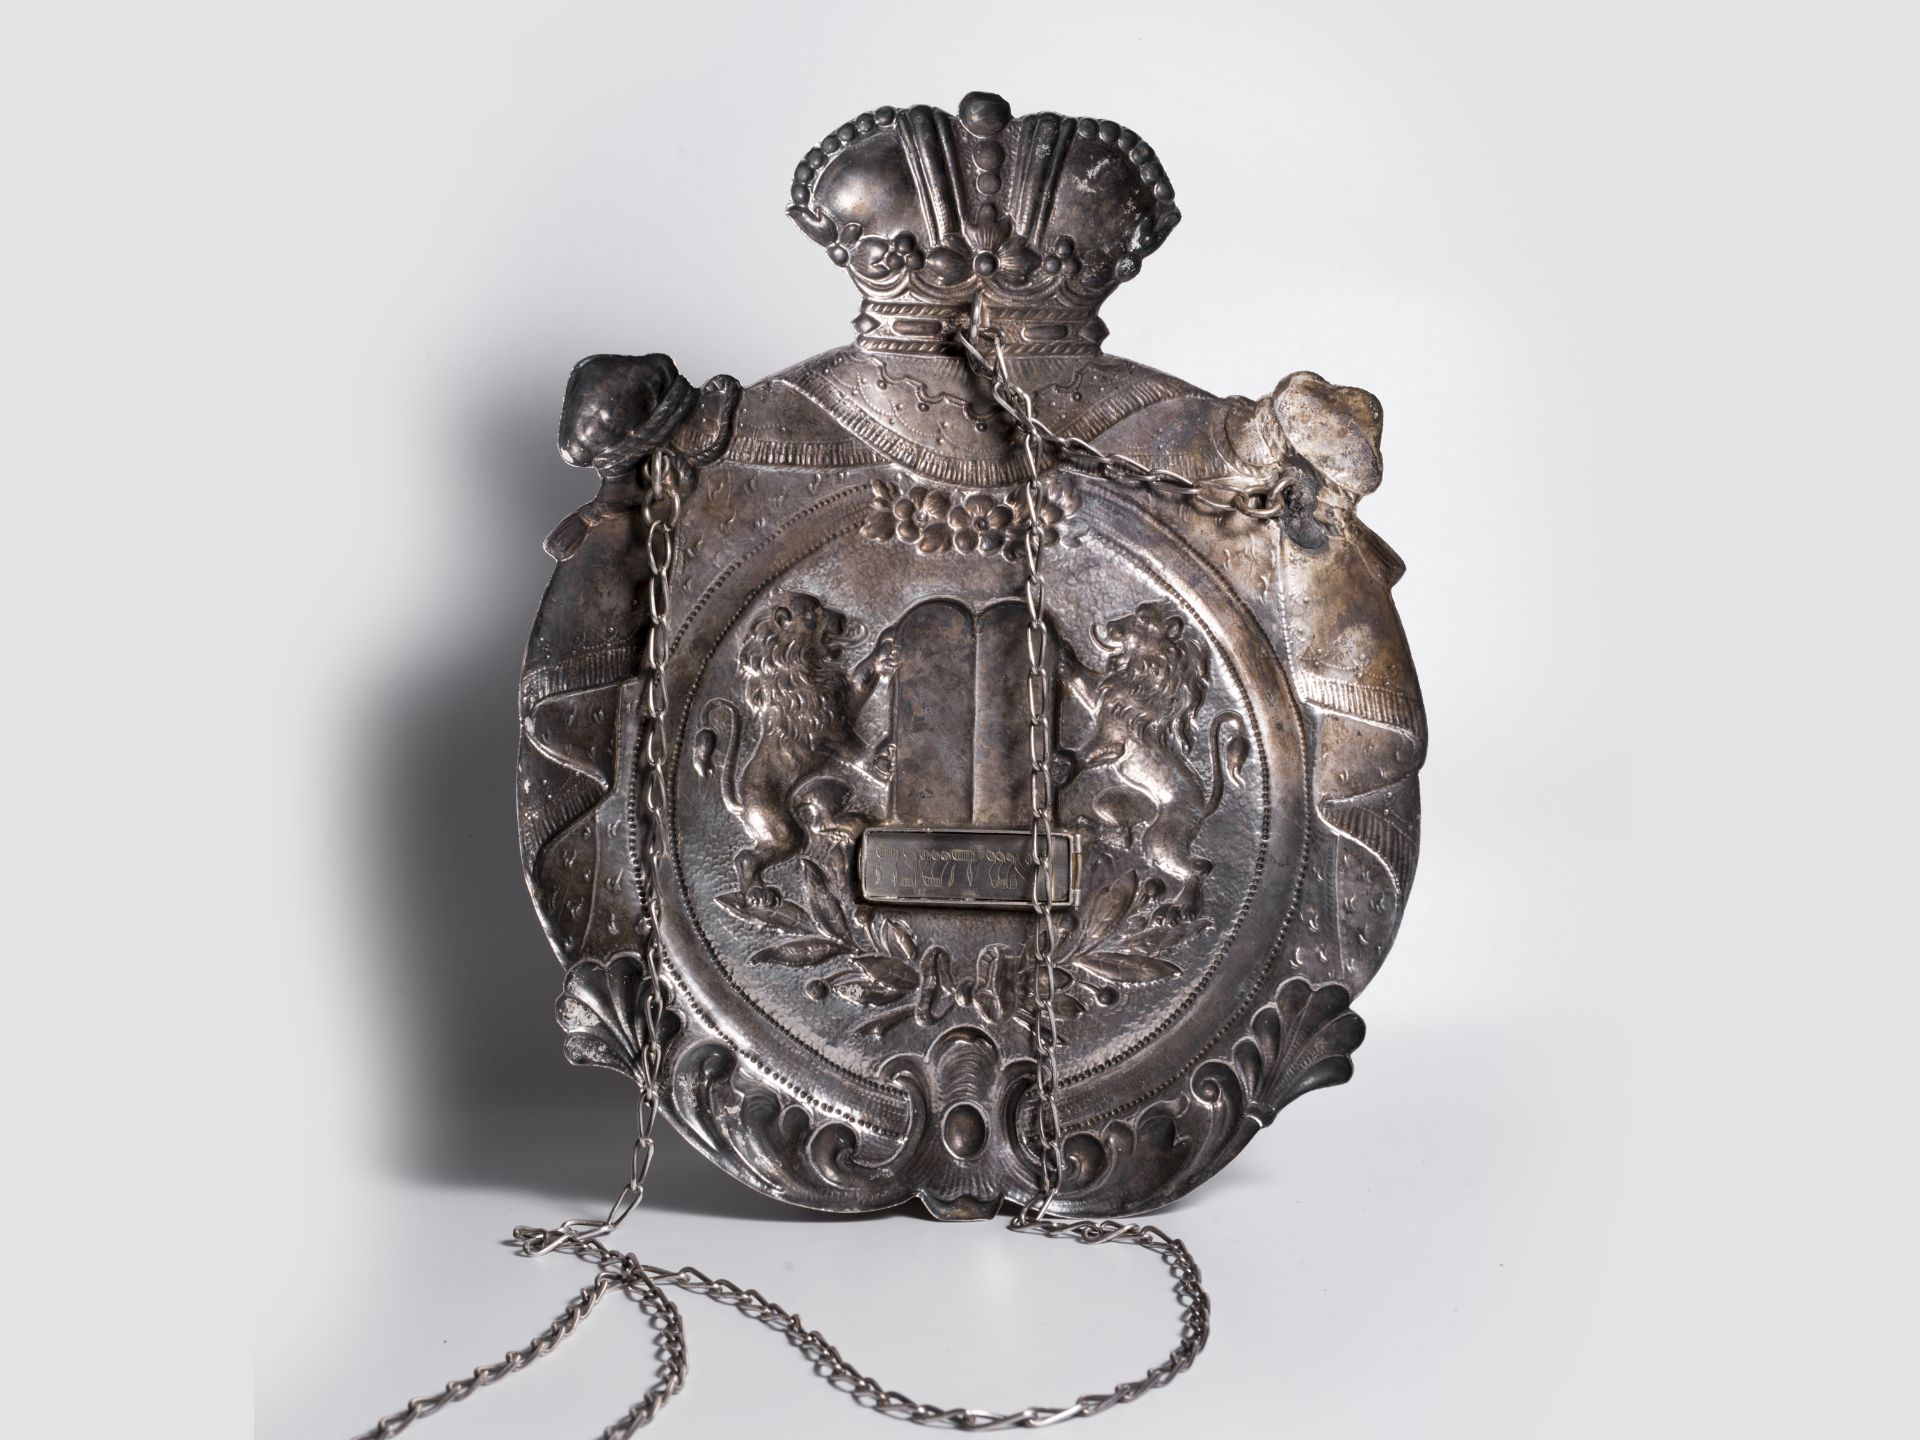 Torah shield, 19th century, Silver, chased & engraved in relief - Image 2 of 4